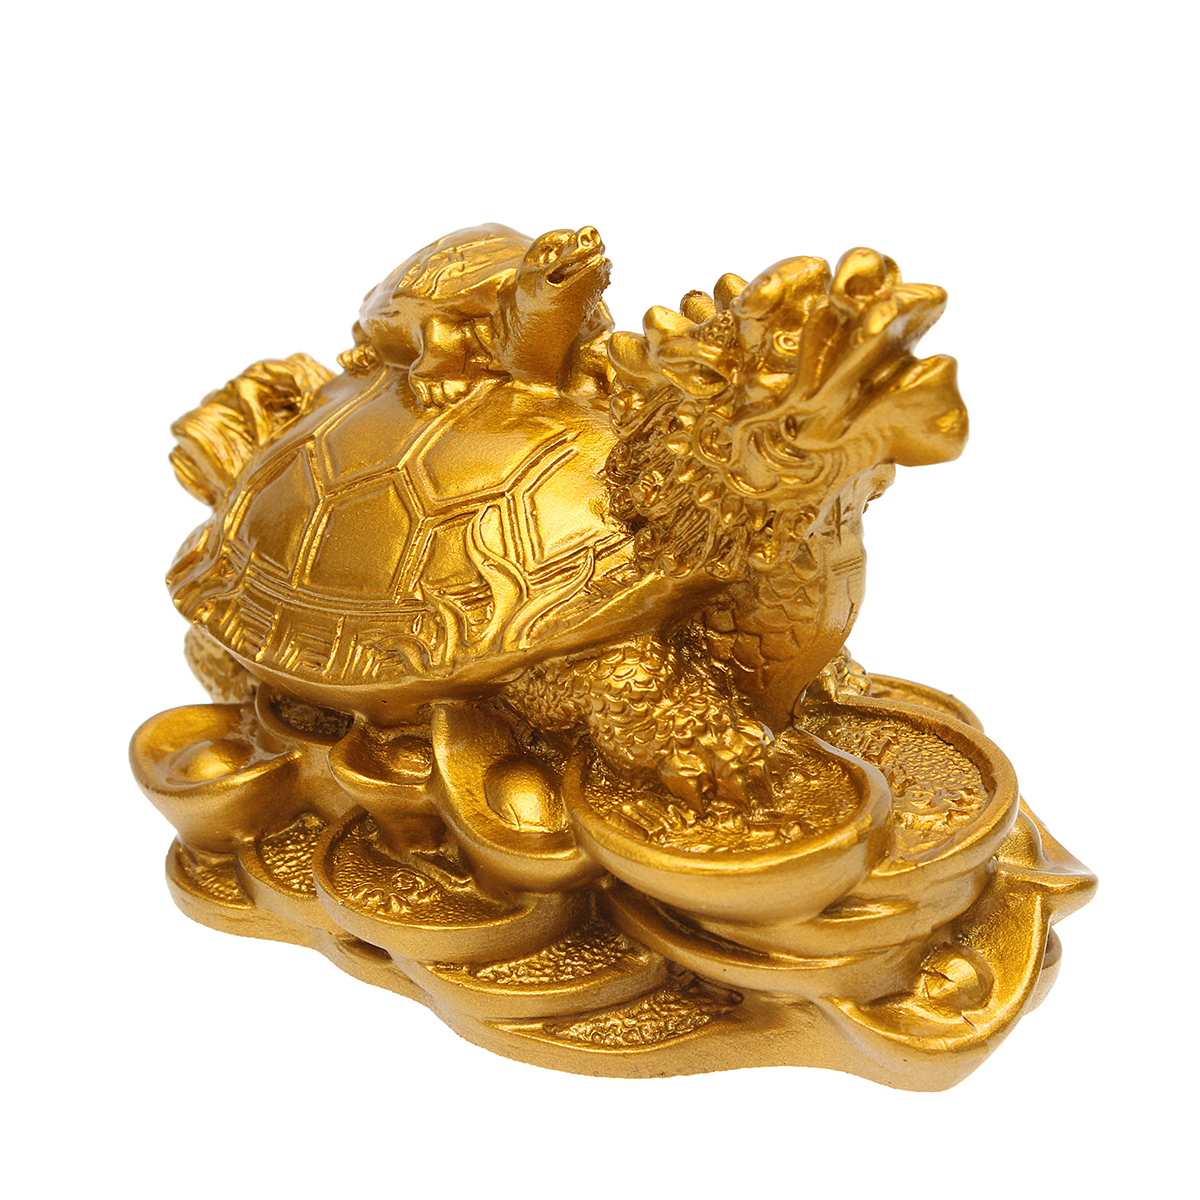 Resin Statue Decoration Feng Shui Dragon Turtle Tortoise Gold Coin Money Wealth Figurine 2